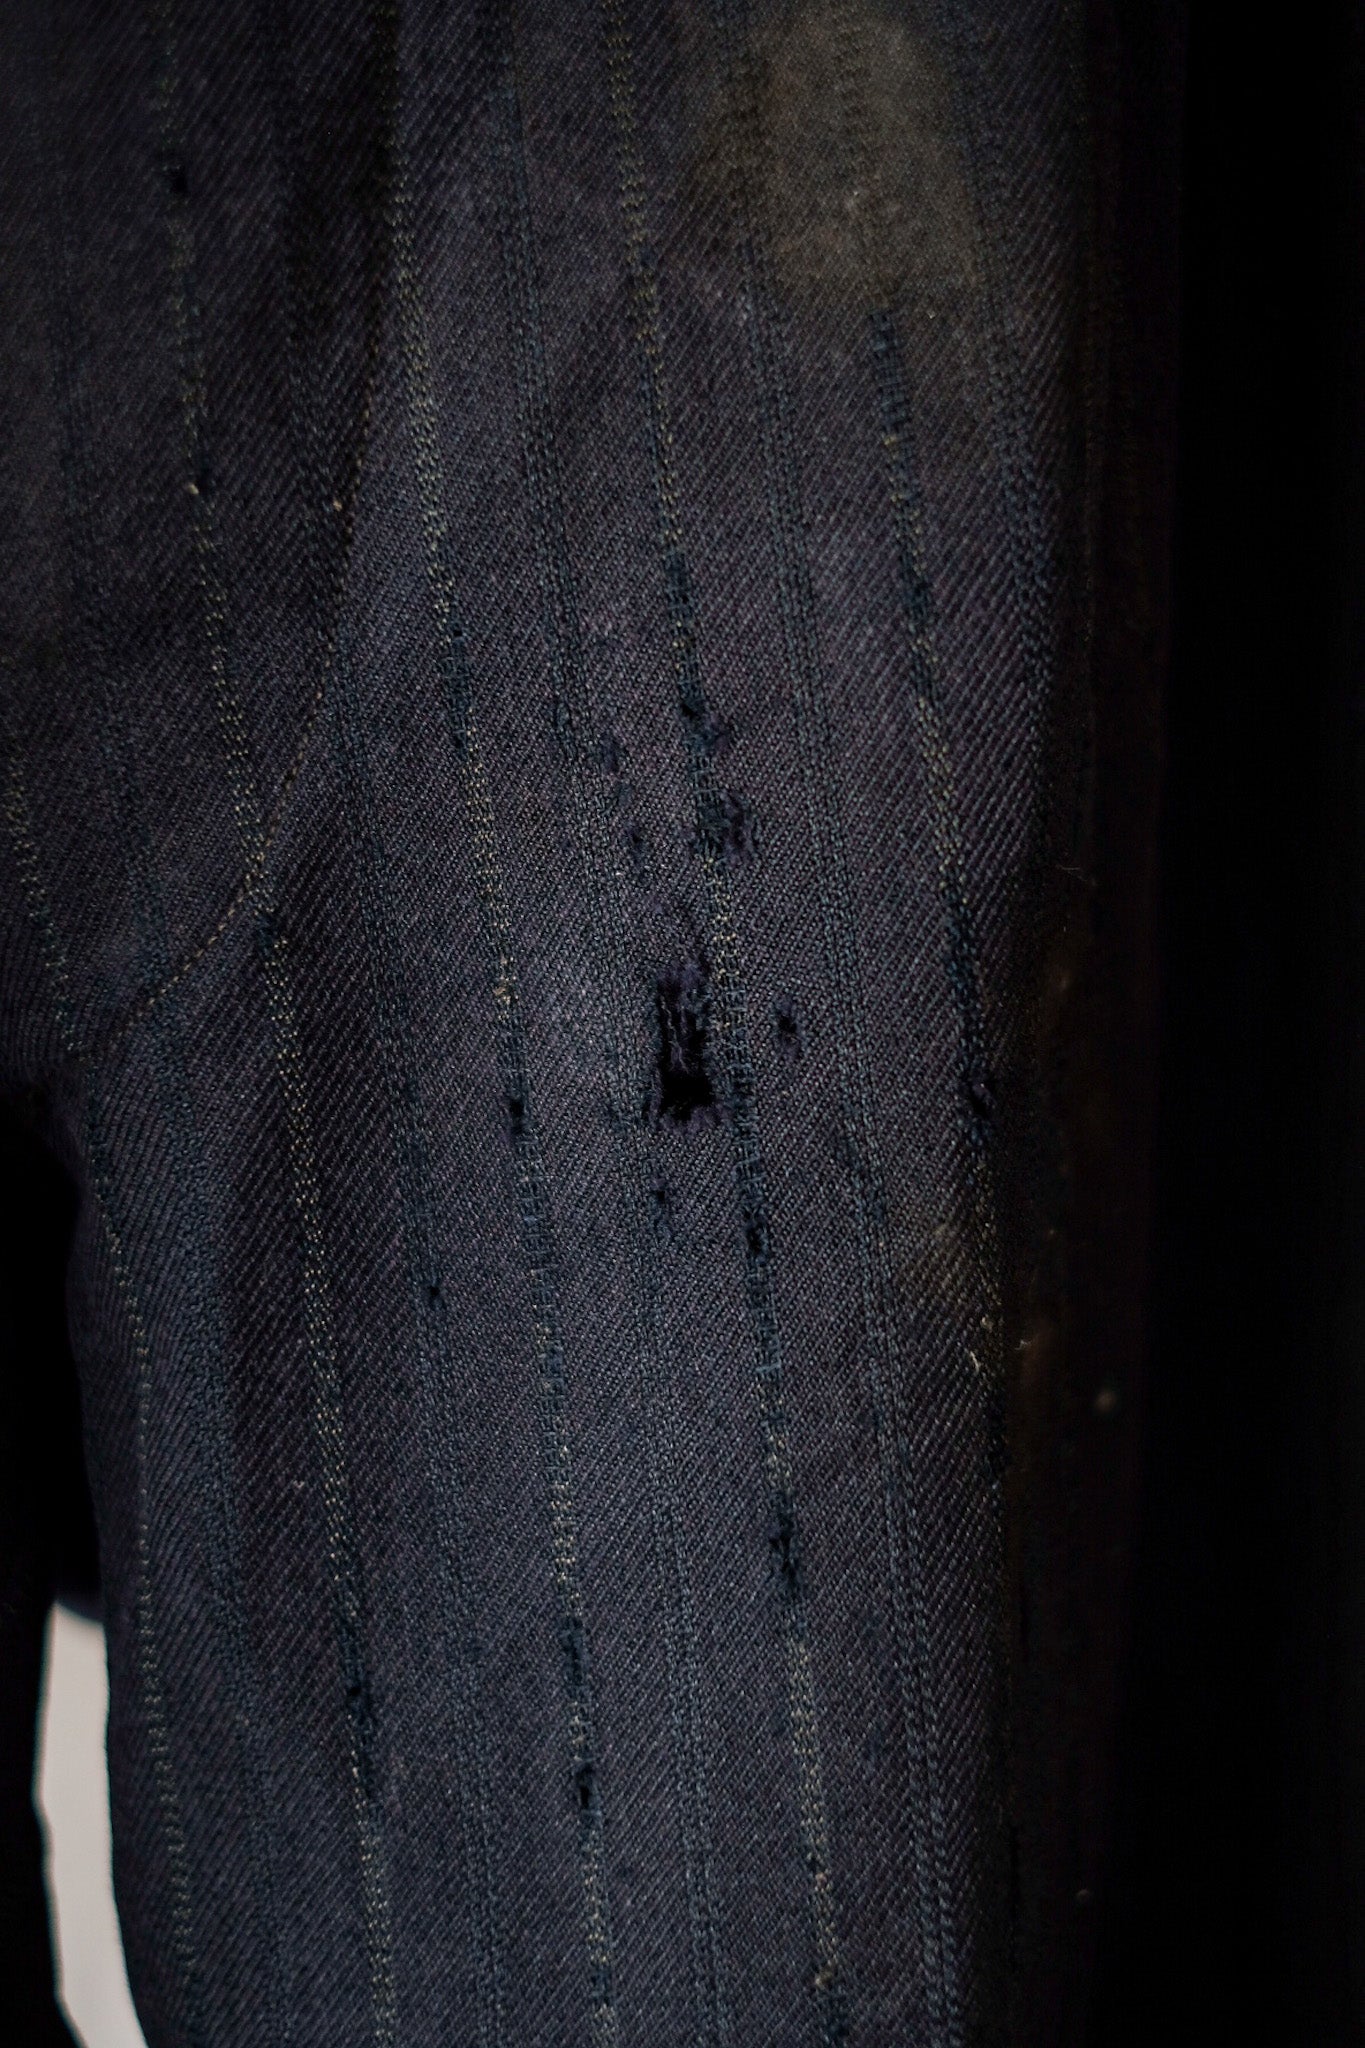 [~ 40's] French Vintage Navy Wool Work Striped Pant